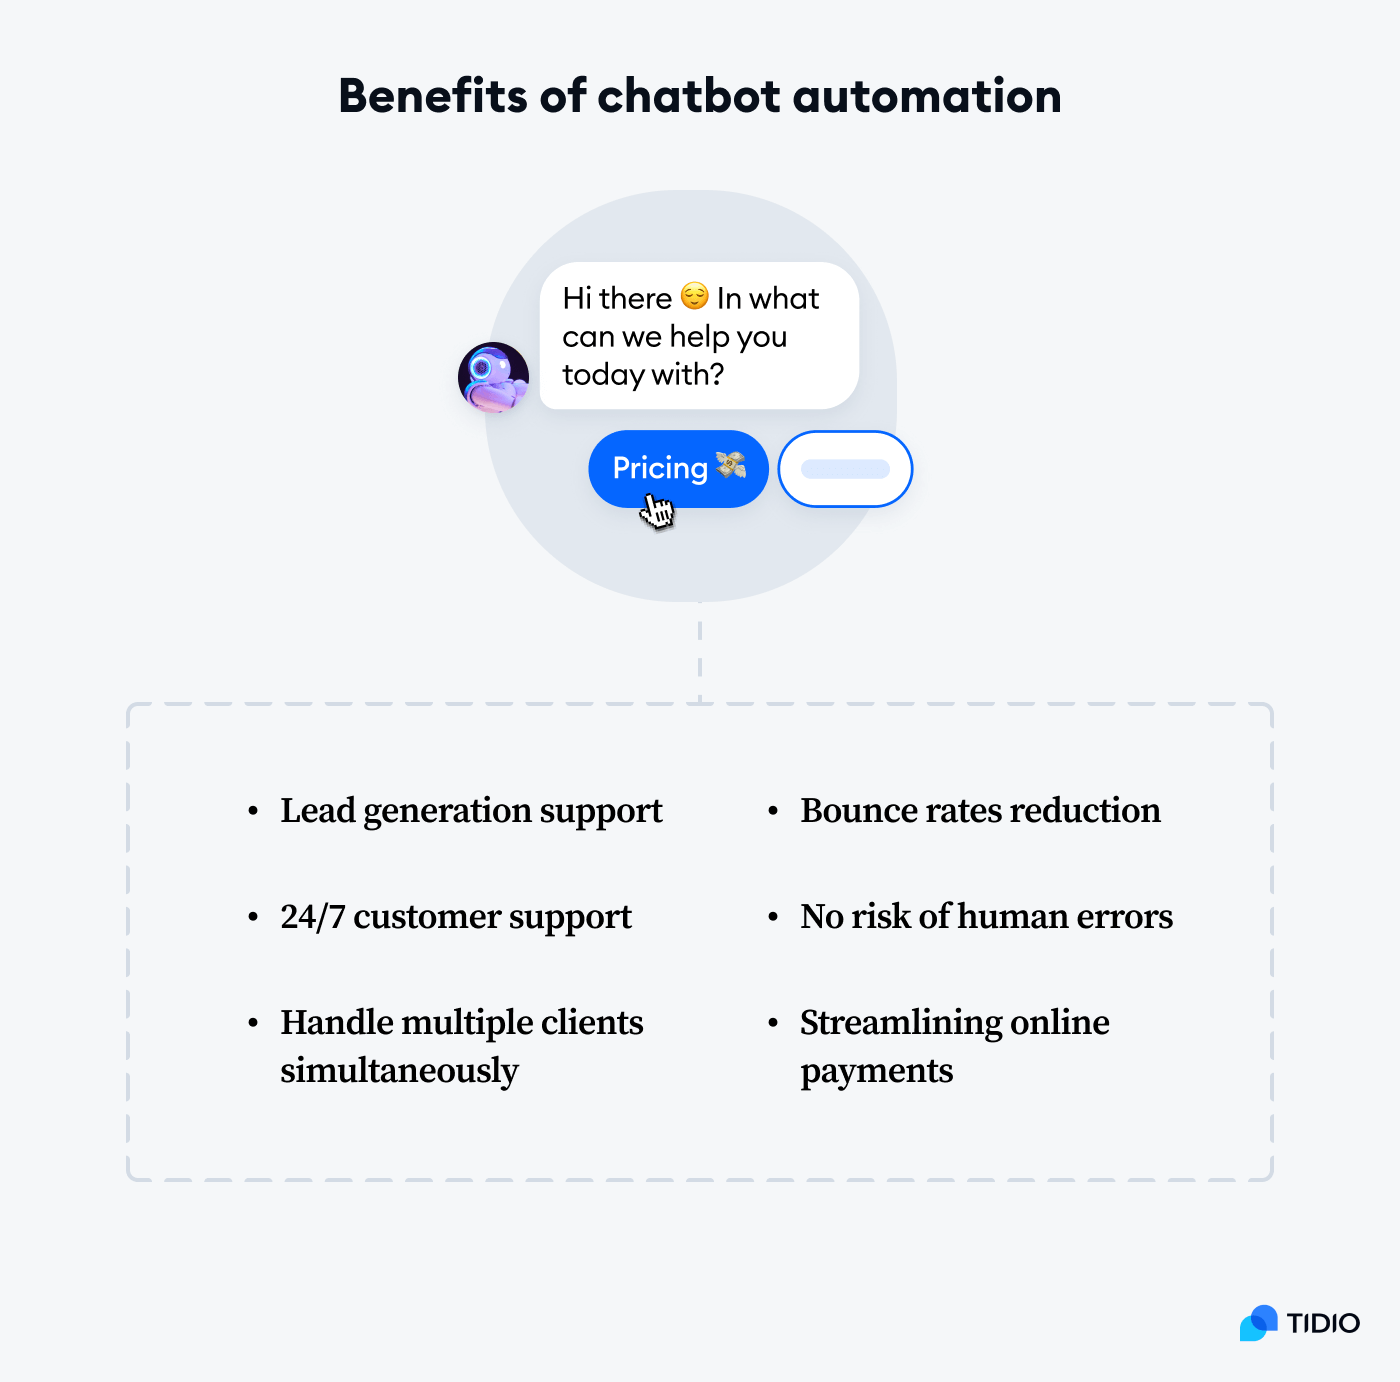 Benefits of chatbot automation listed on image